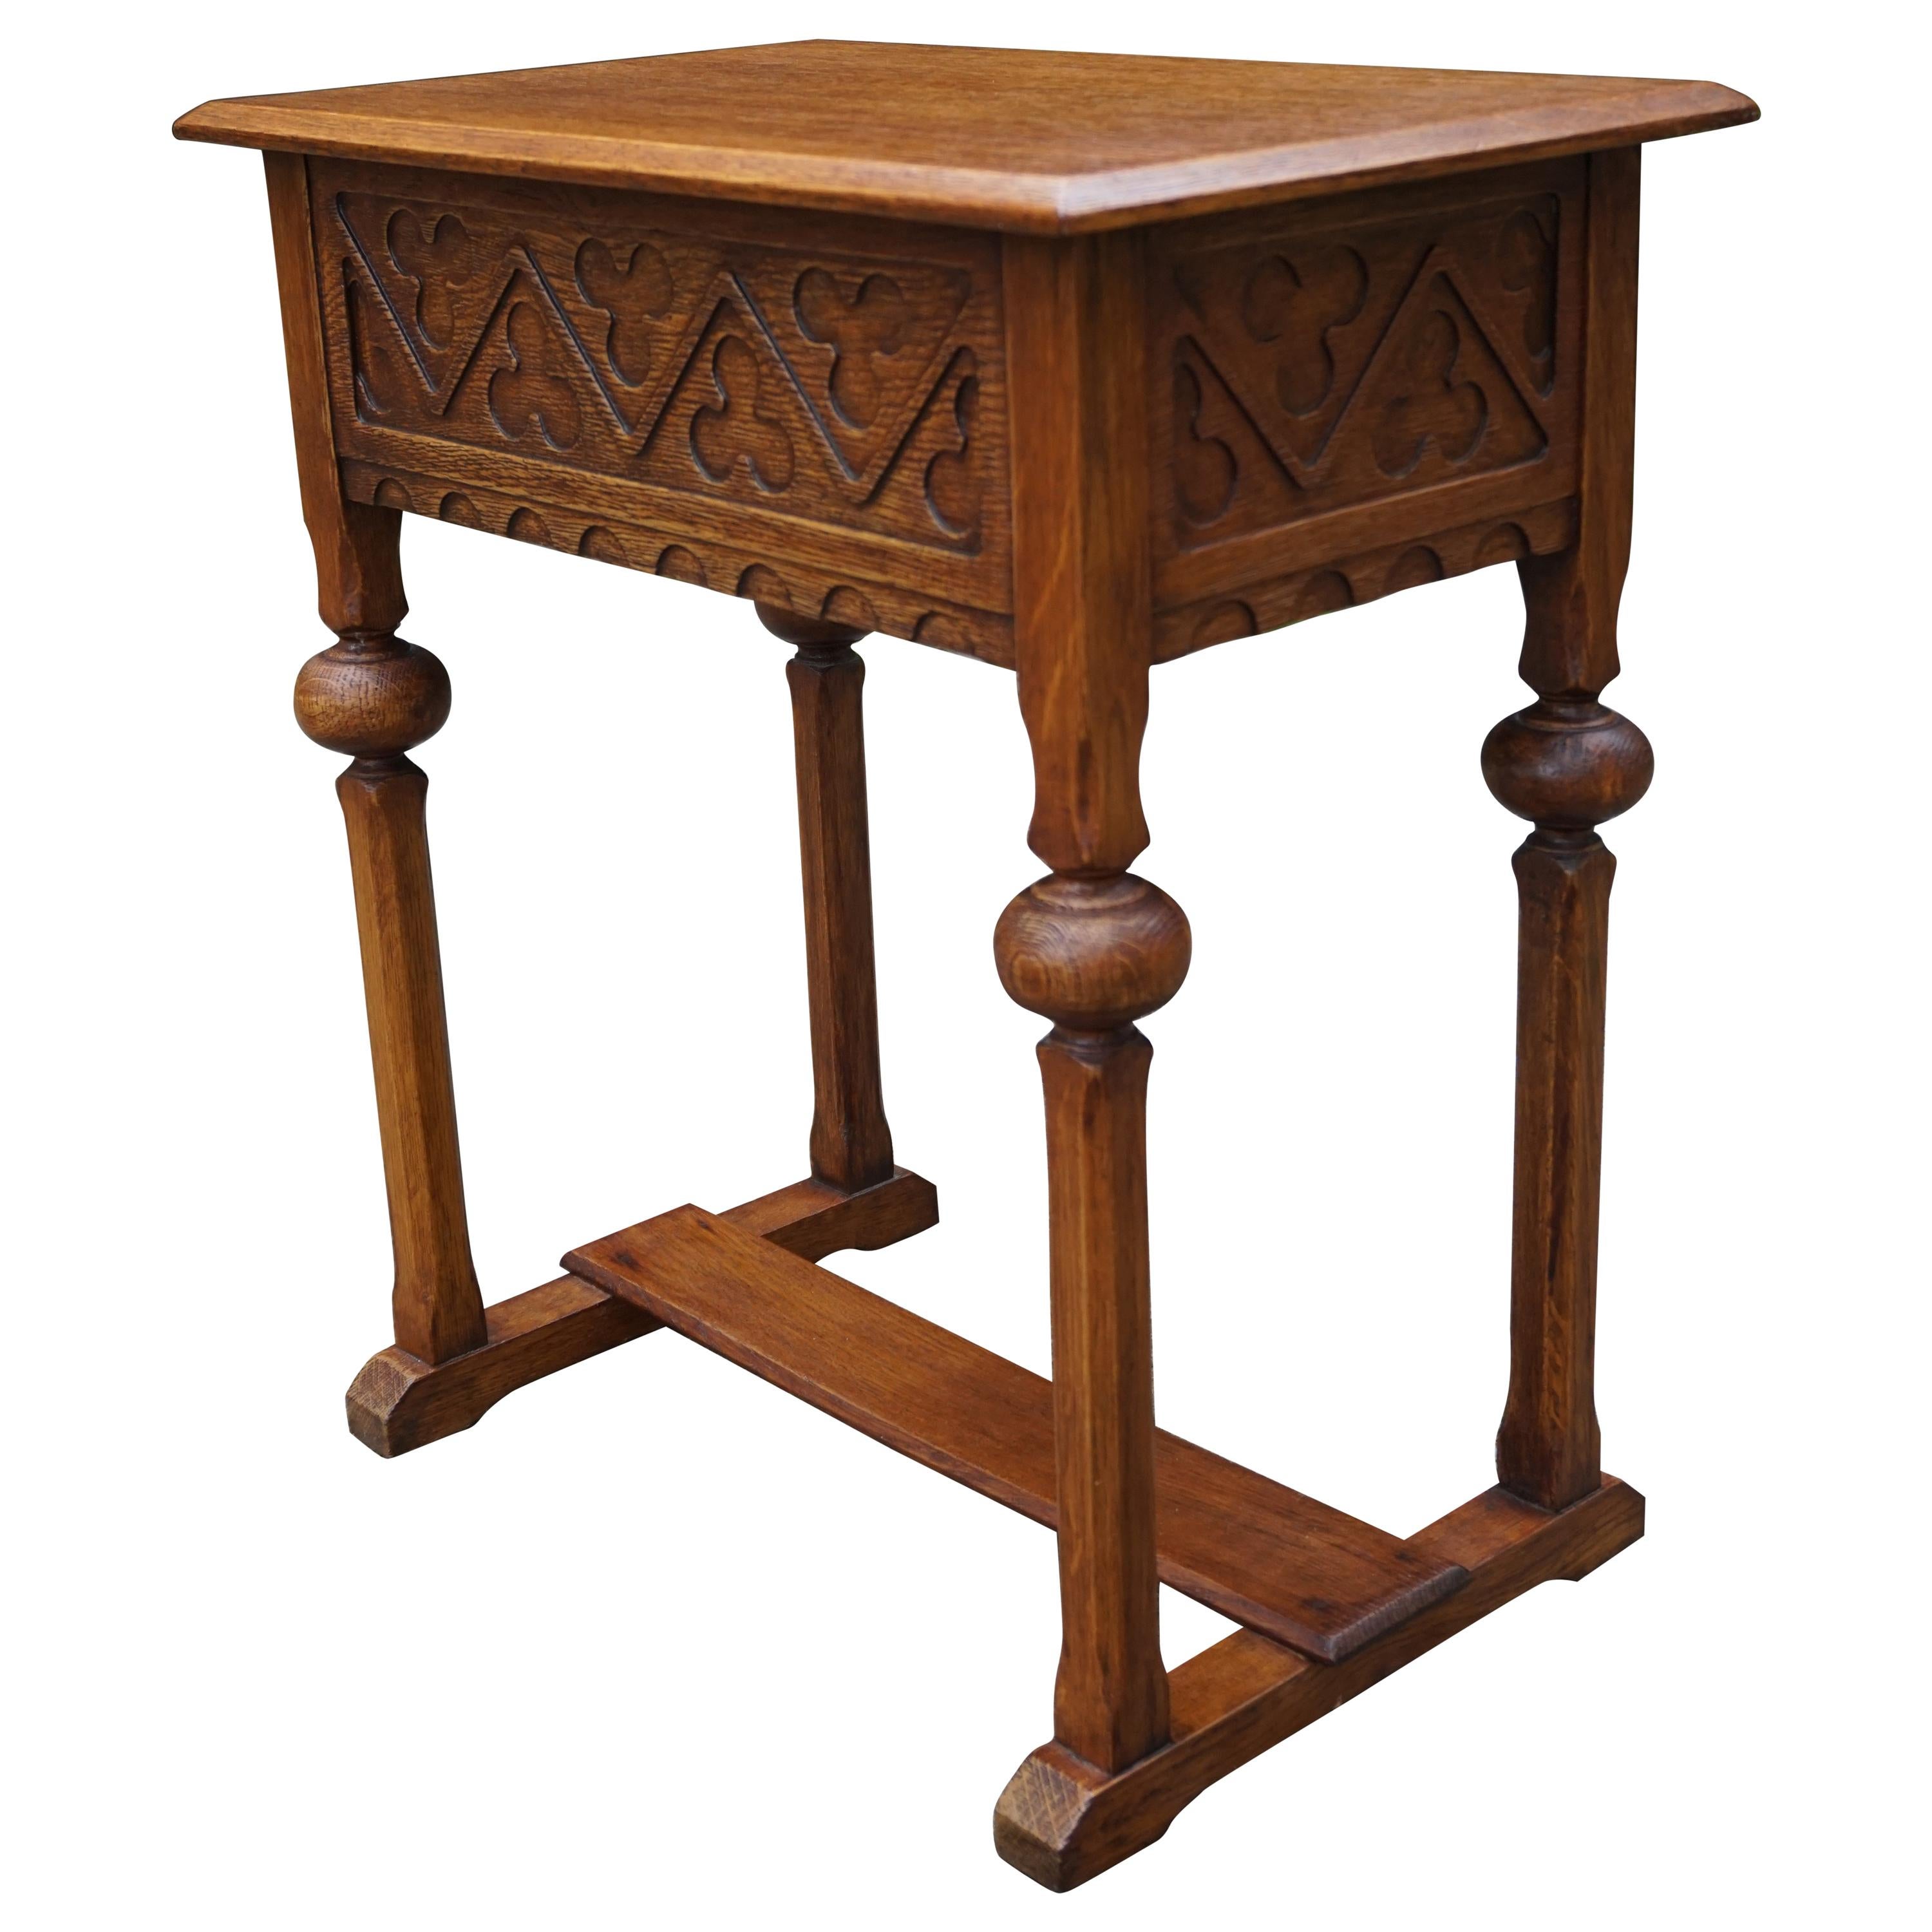 Early 1900s Handcrafted Gothic Revival Work or Side Table with Trefoil Decor